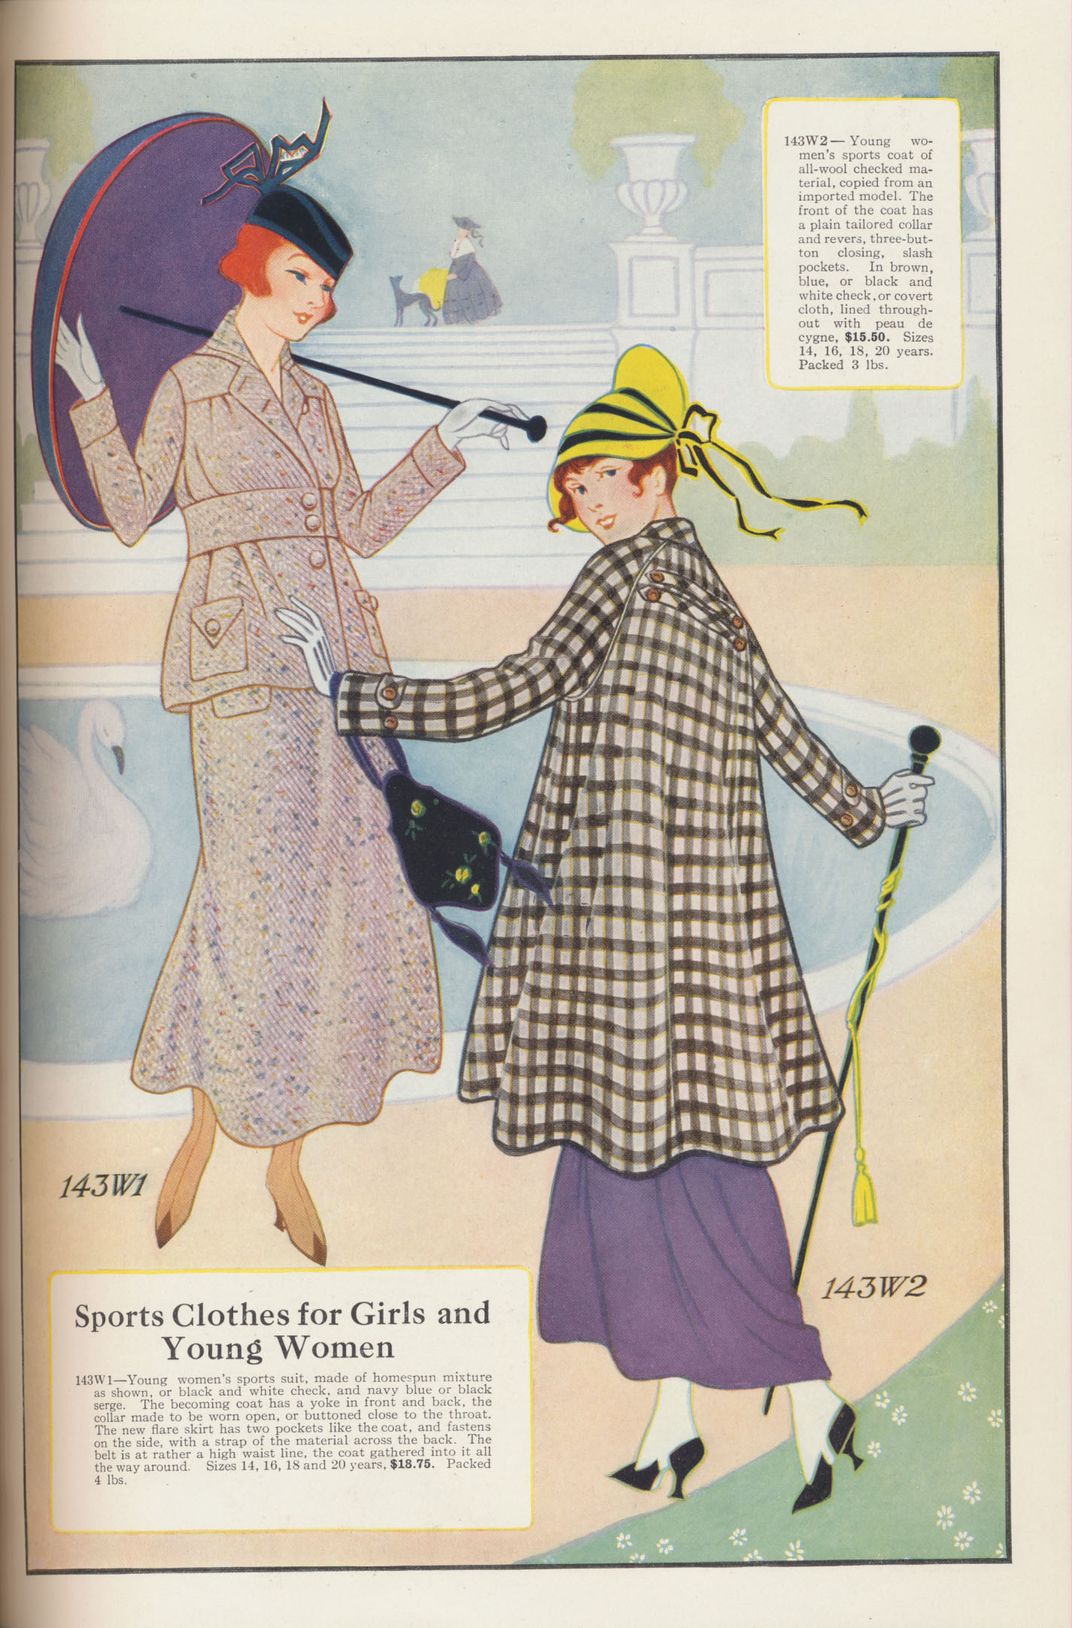 Illustration of two women in coats from early 20th century trade catalog.